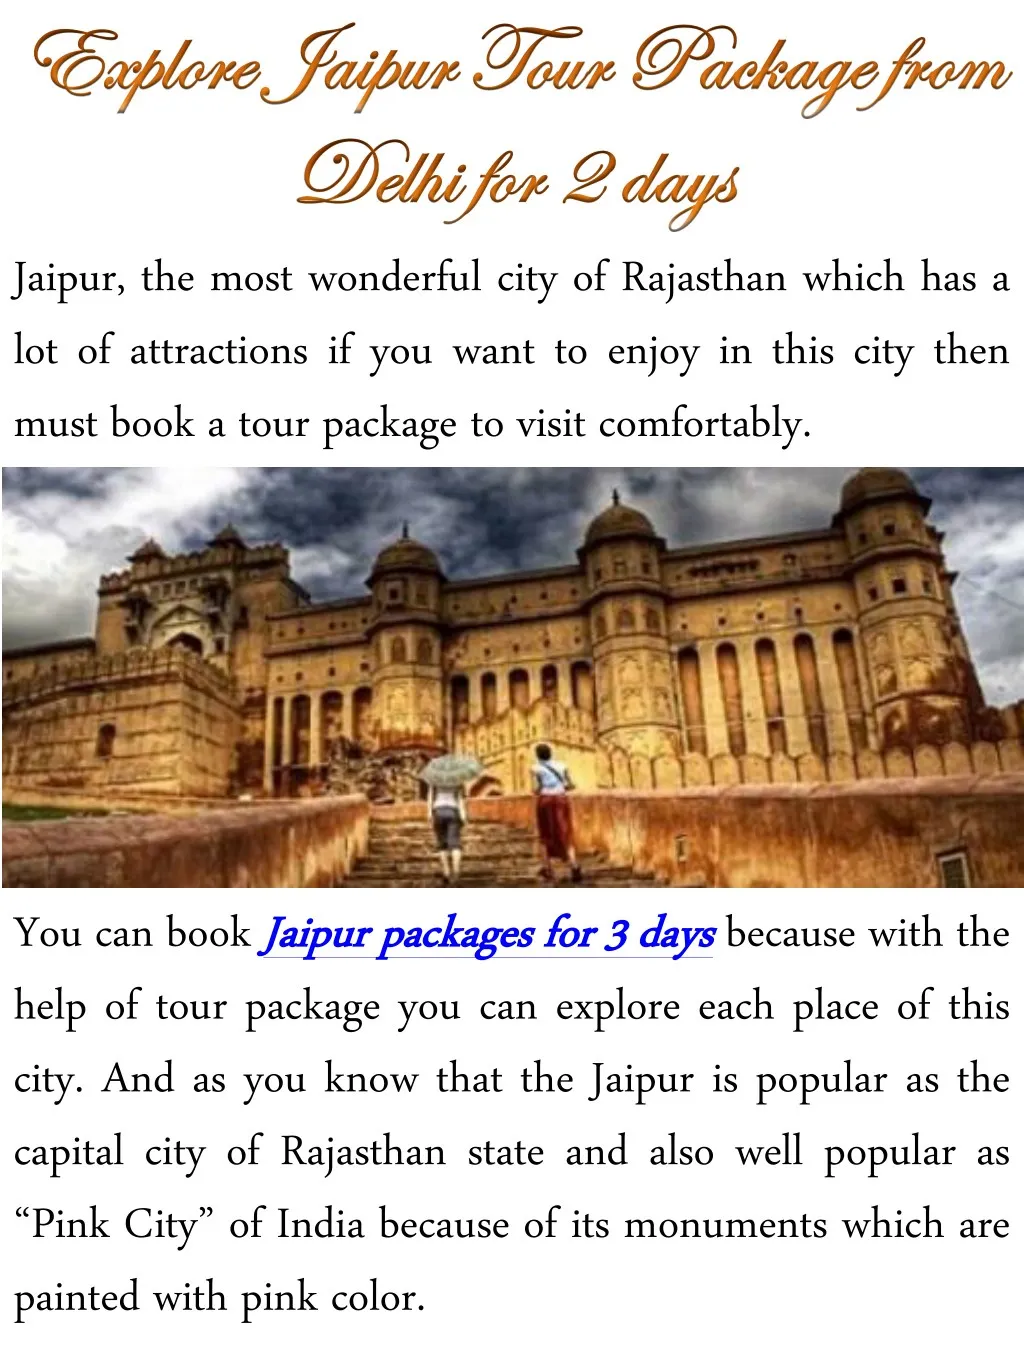 jaipur the most wonderful city of rajasthan which